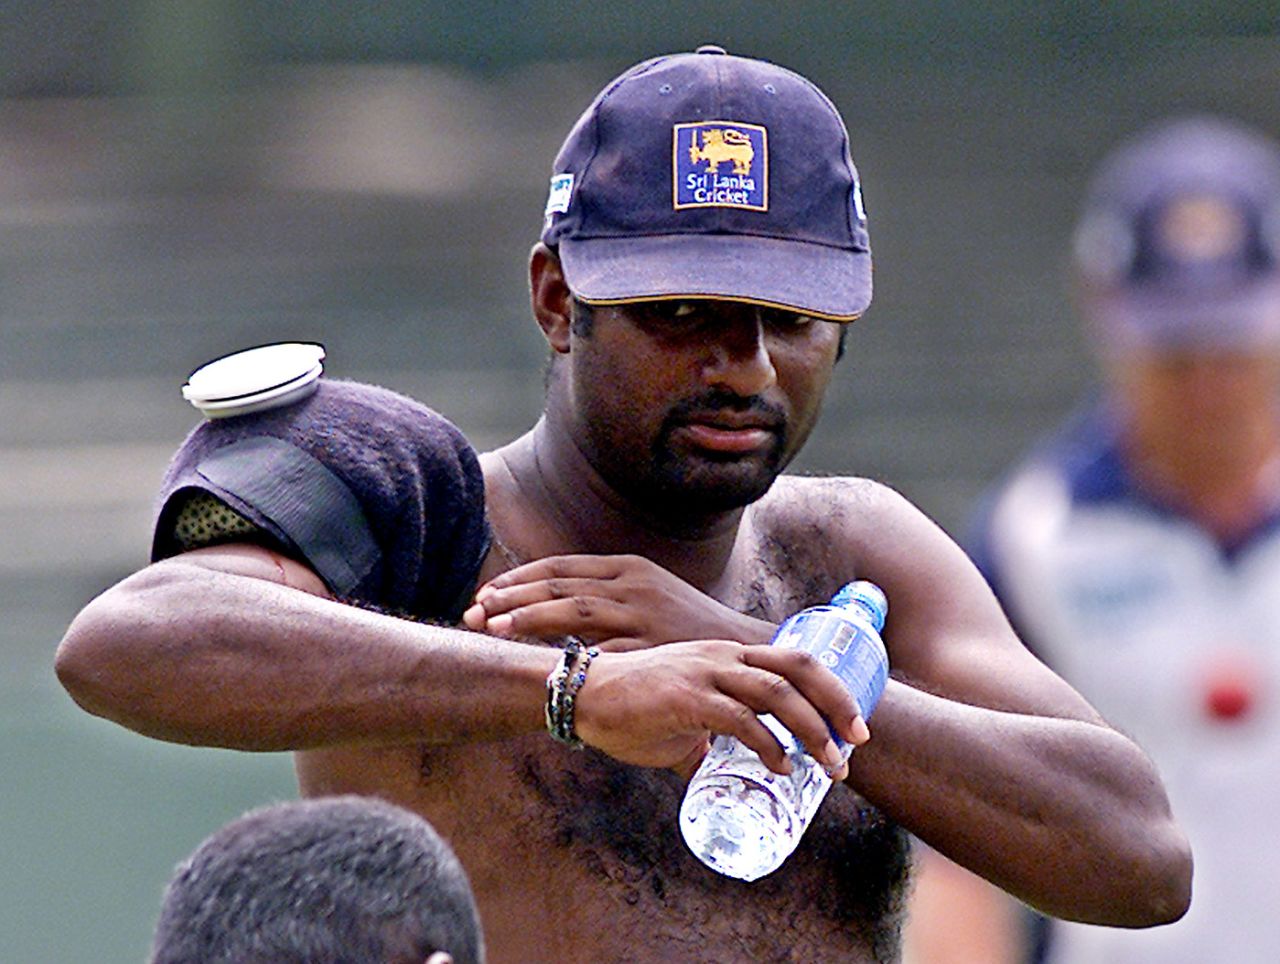 Muttiah Muralitharan puts an ice pack on his shoulder, Colombo, August 10, 2004